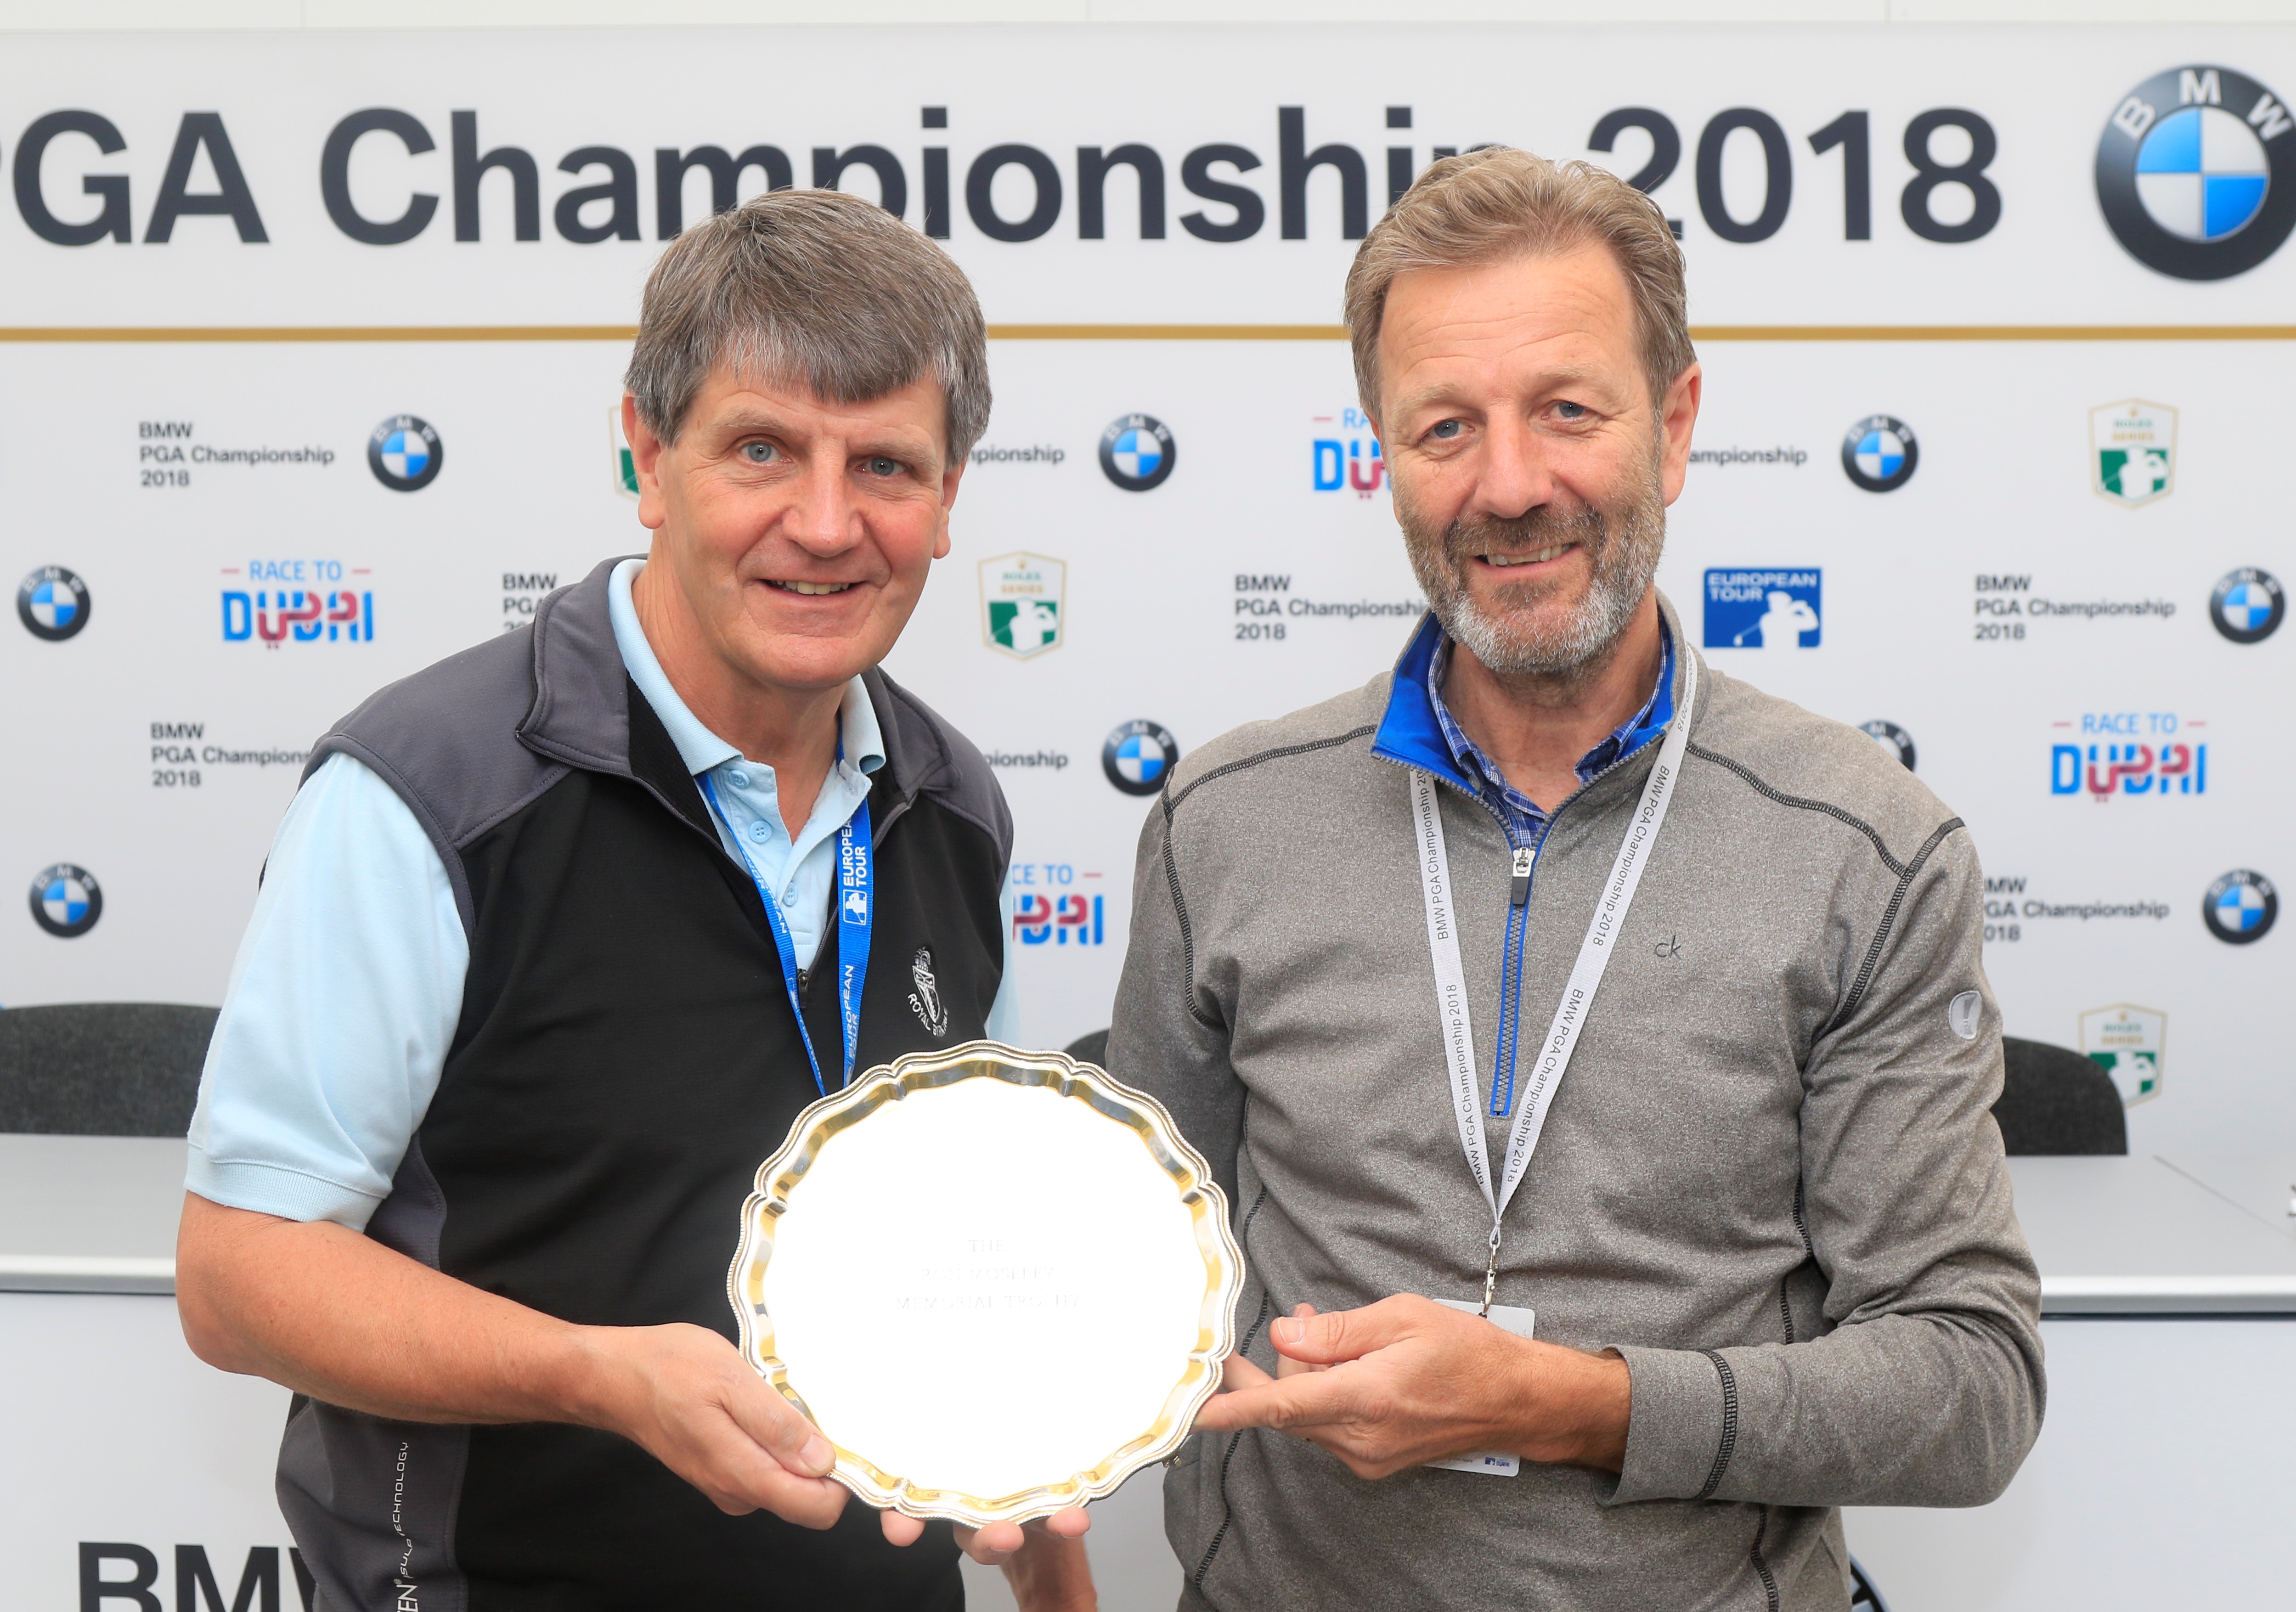 AGW Golf Captain Peter Dixon presents Dave Facey with the Ron Moseley trophy (Photo - Thanks to Fran Caffrey (Golffile.ie)